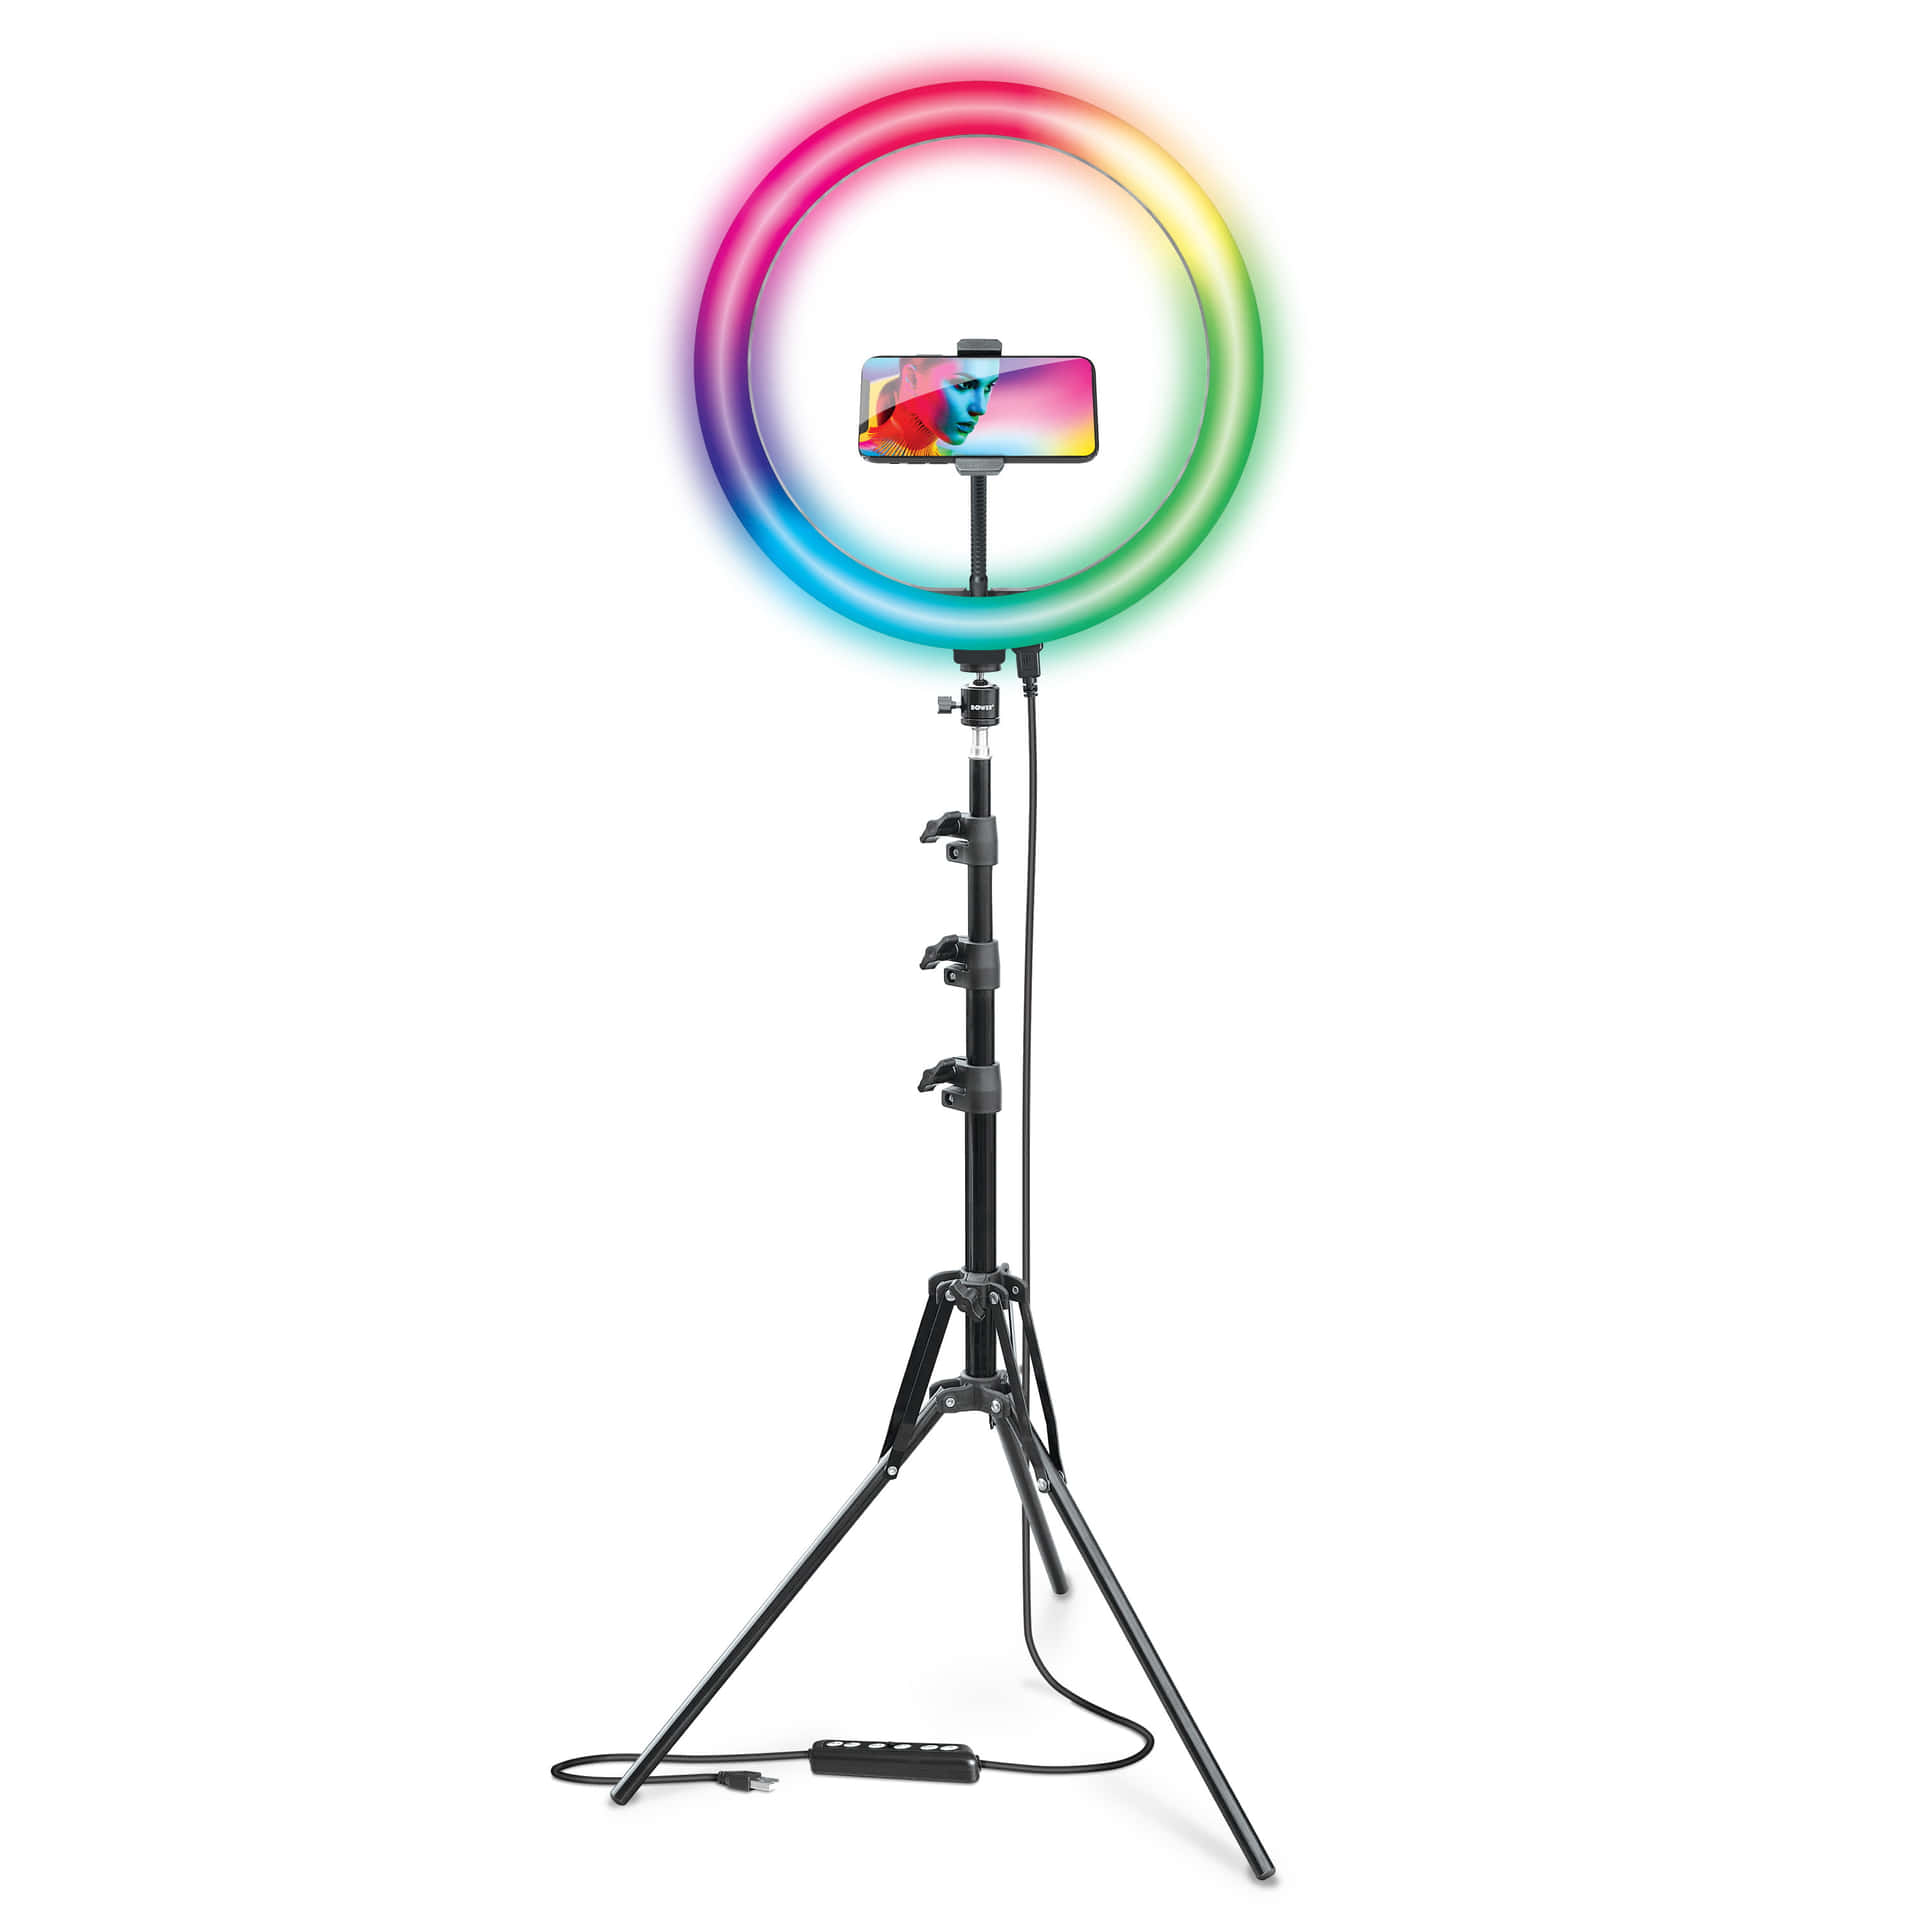 A Ring Light Stand With A Phone On It